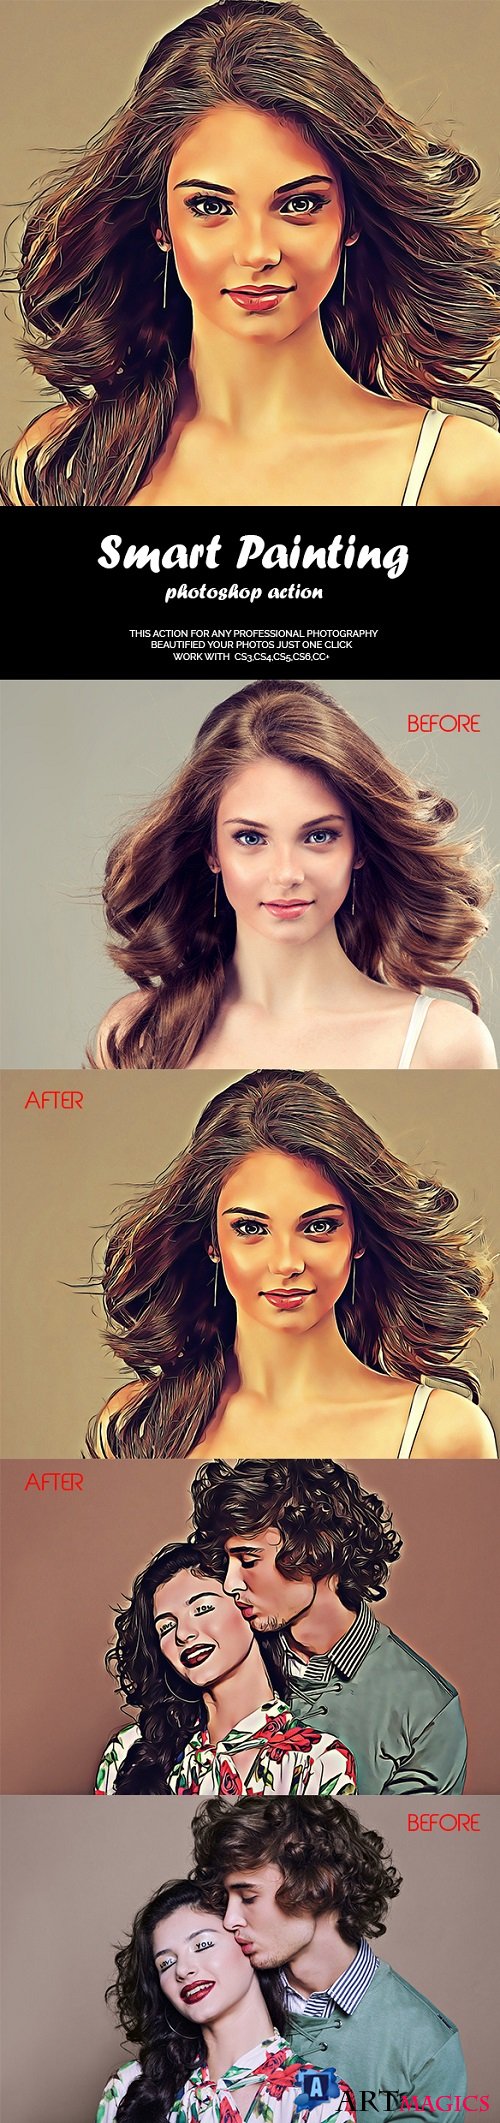 Smart Painting Photoshop Action 21139558